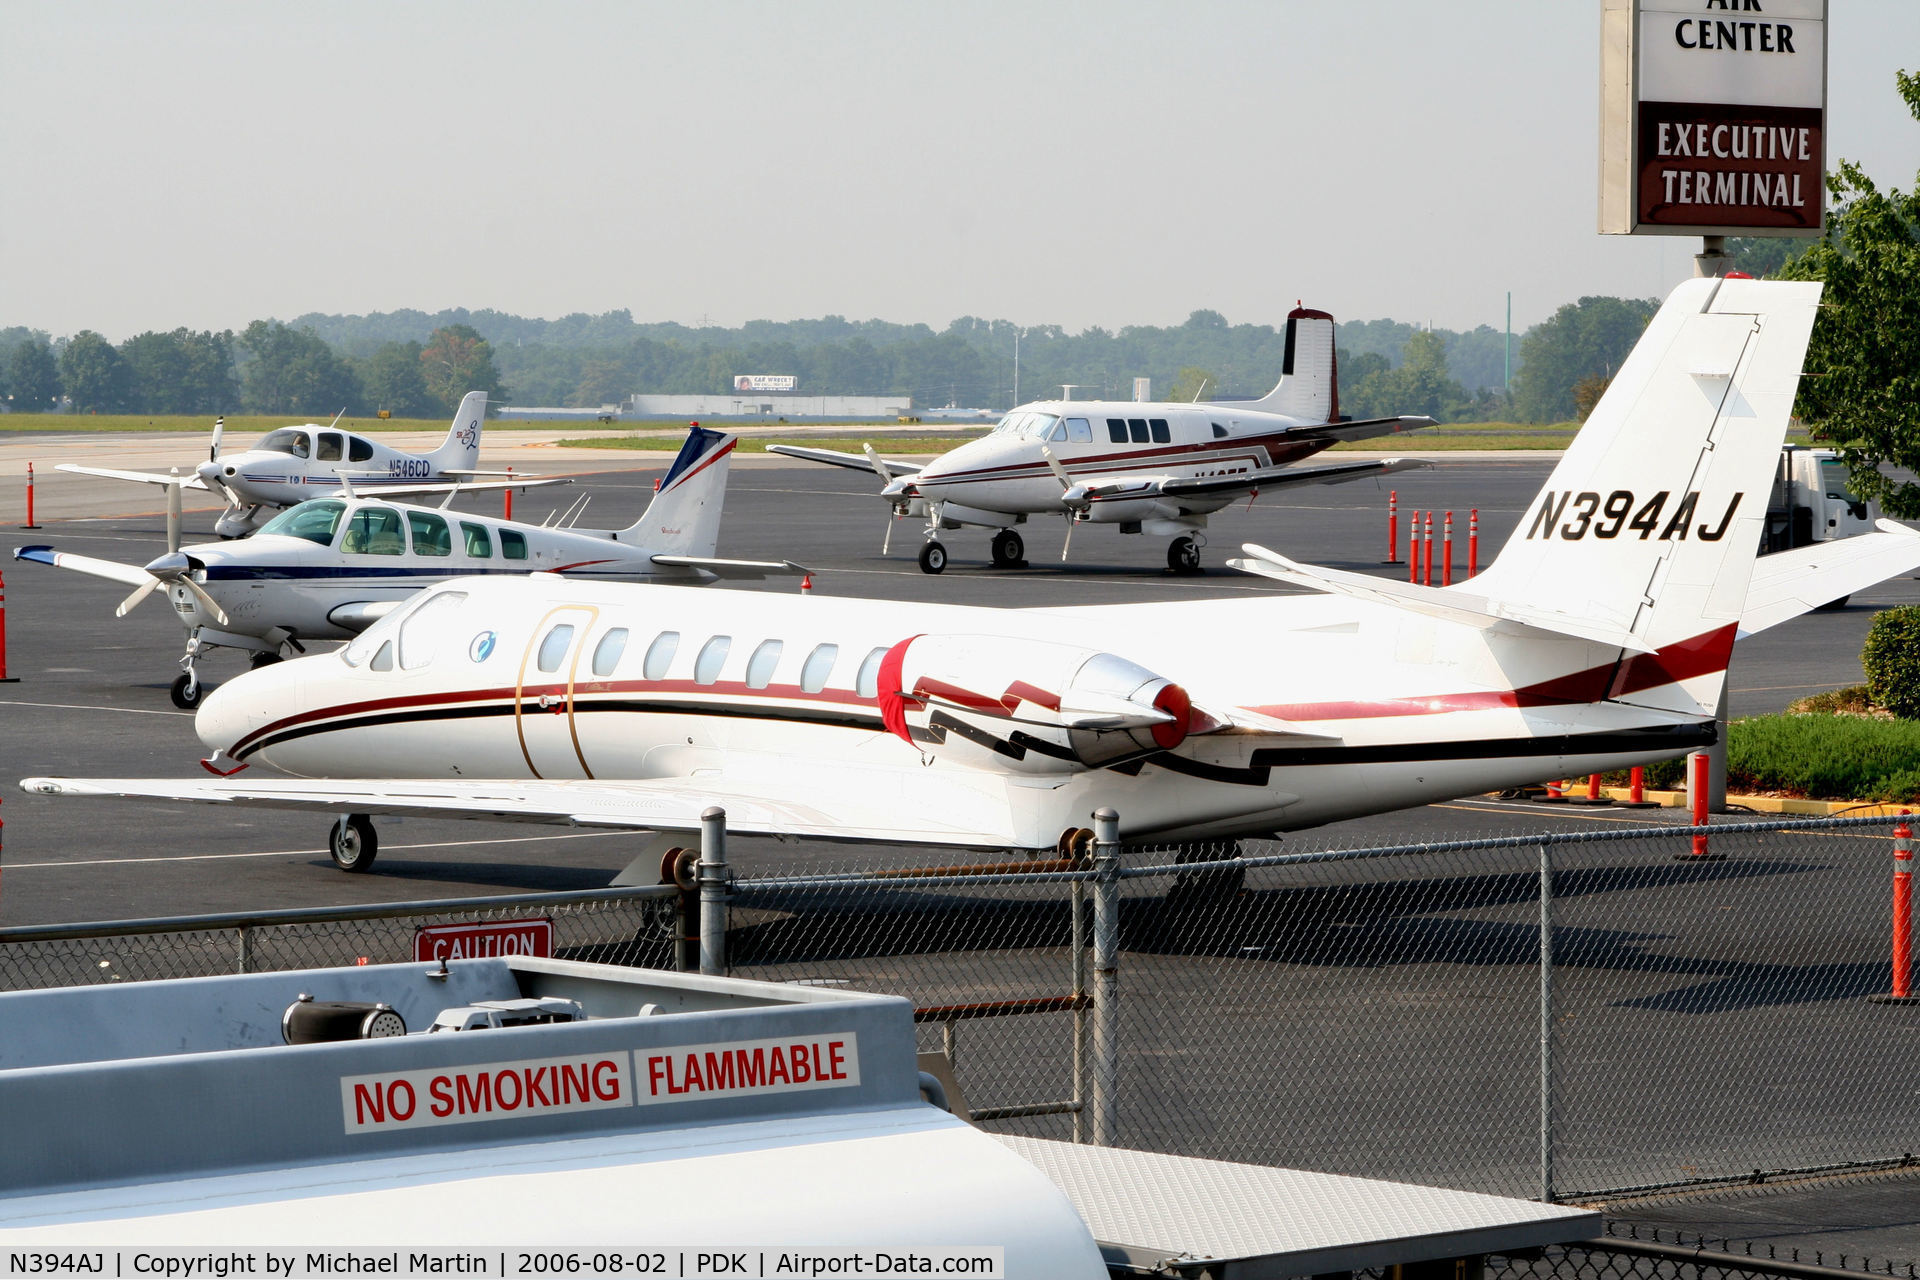 N394AJ, 1993 Cessna 560 Citation V C/N 560-0230, Tied Down @ Mercury Air Center with other A/C